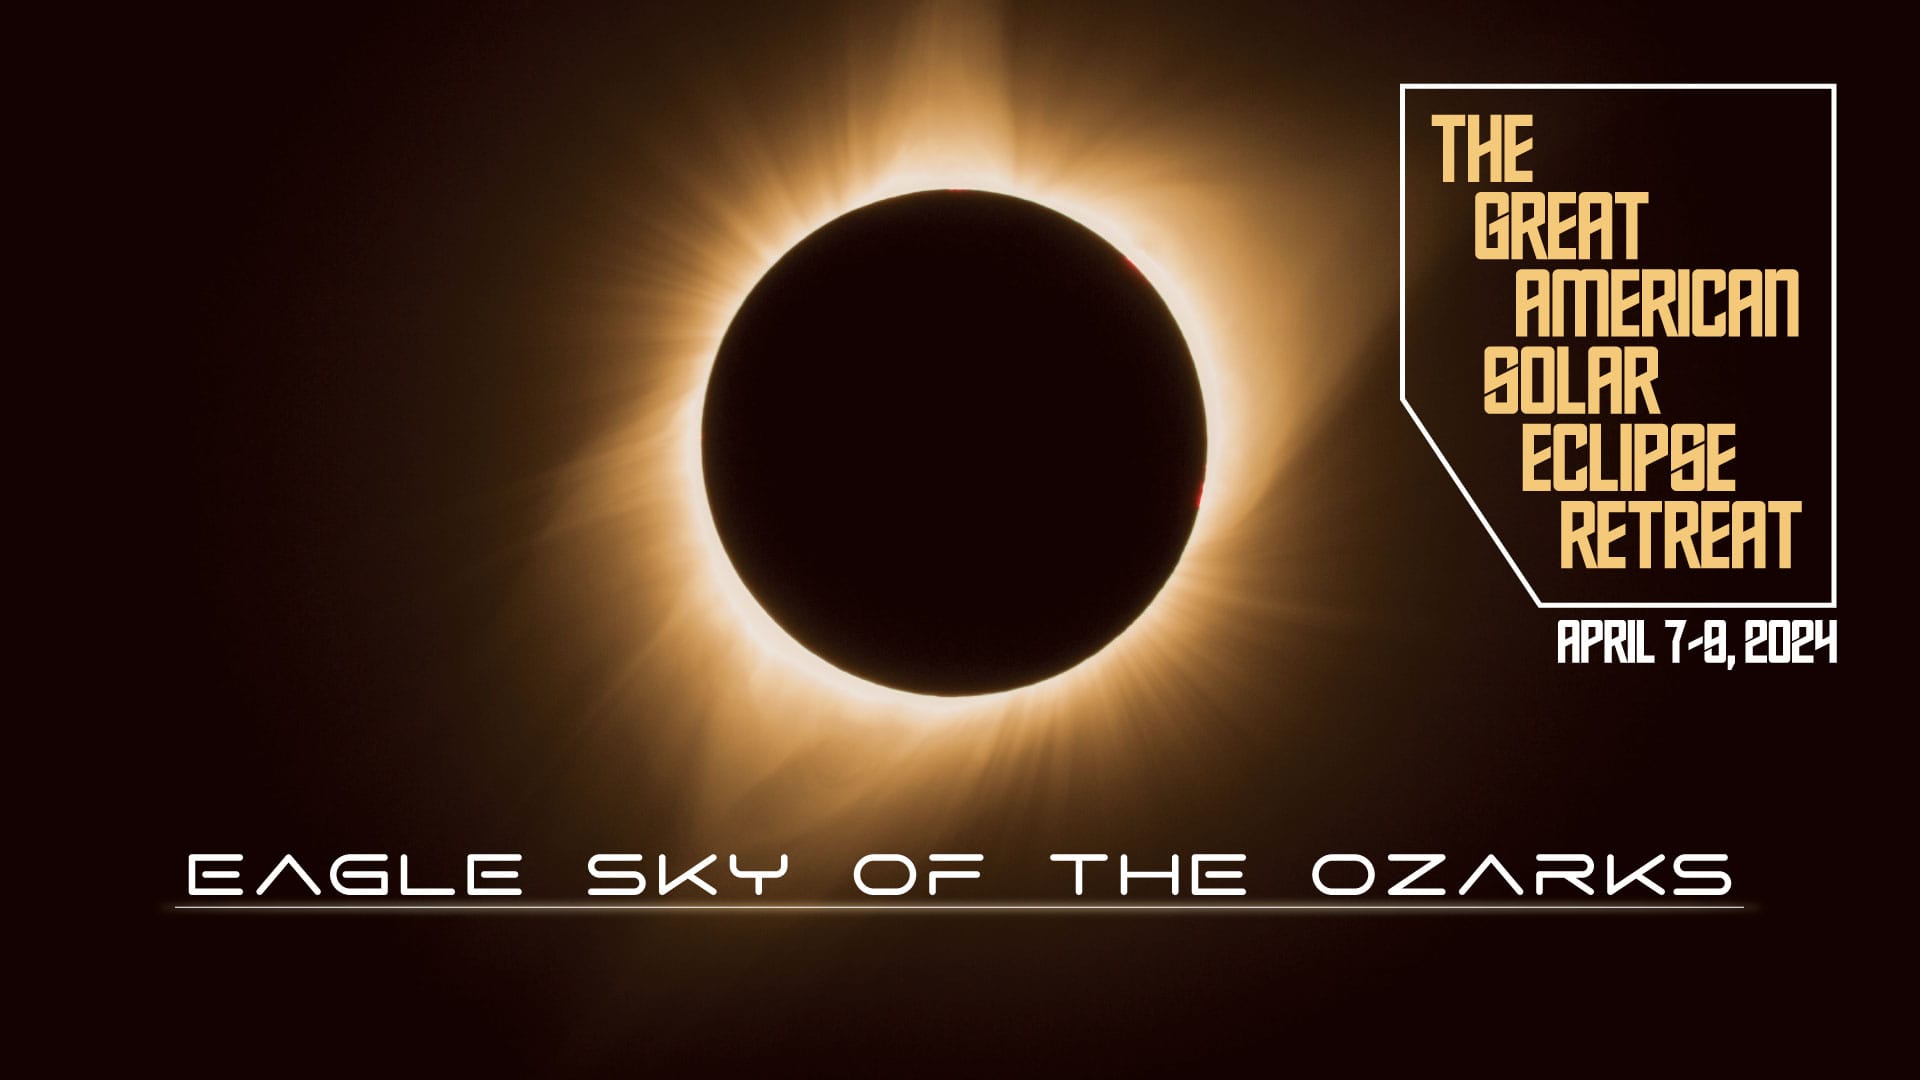 The Great American Solar Eclipse Retreat 2024 at Eagle Sky of The Ozarks - A stunning image capturing the solar eclipse, symbolizing a unique and unforgettable experience amidst the natural beauty of the Ozarks